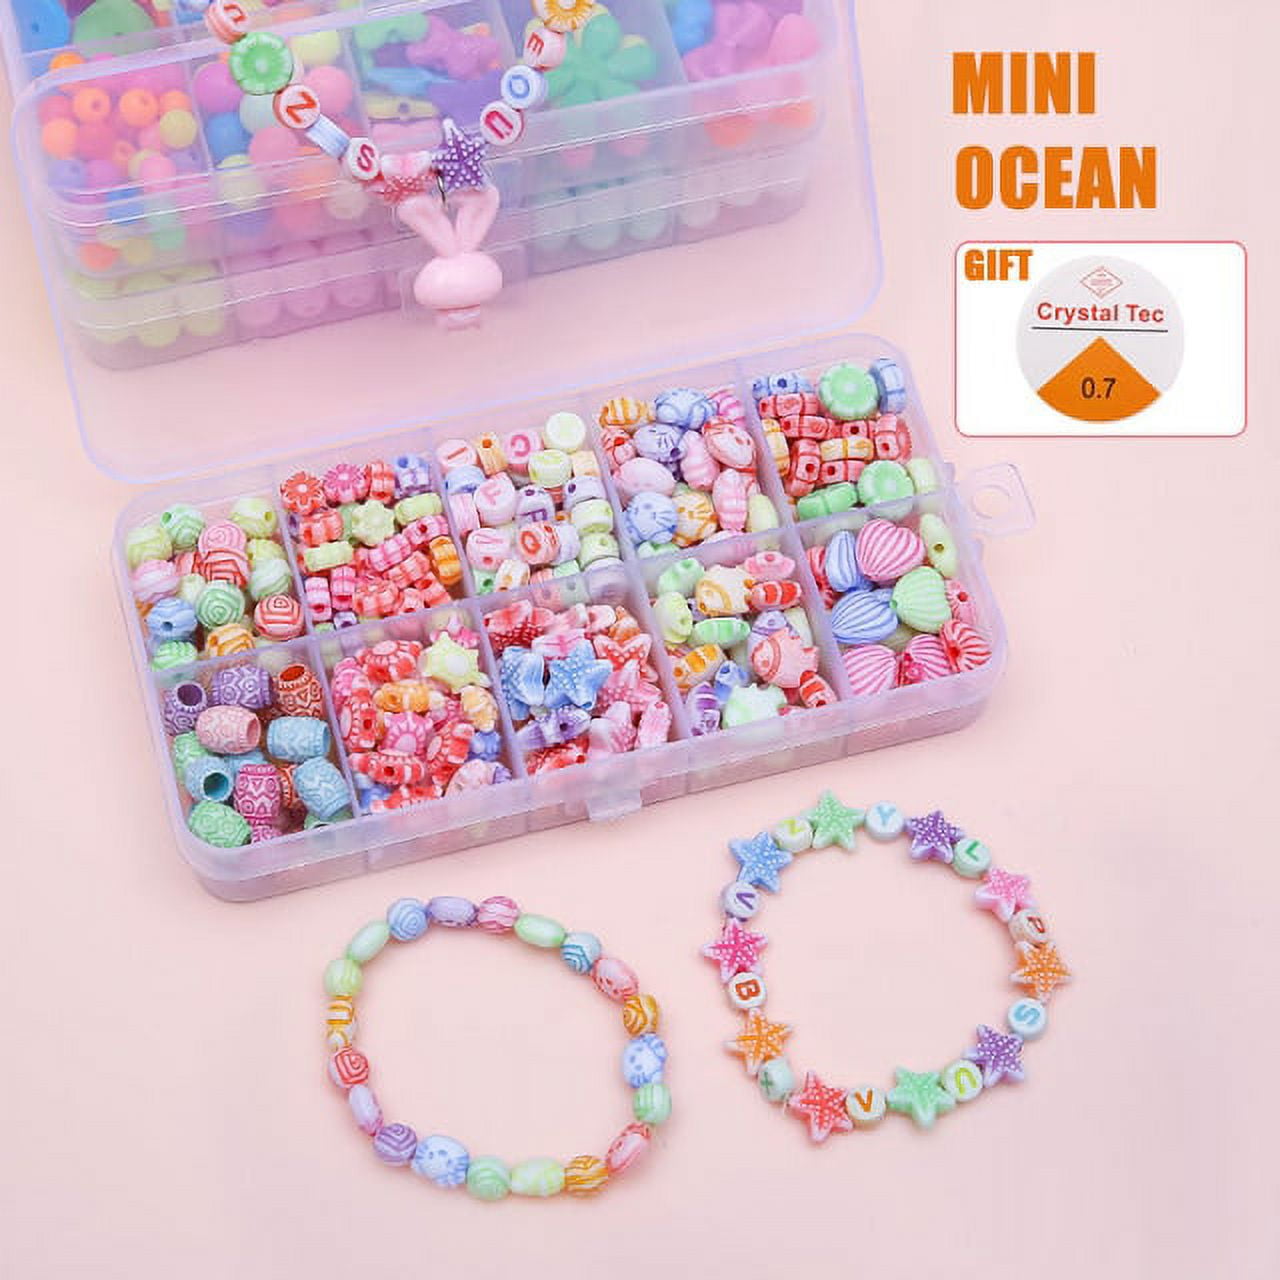 250-700PCS Girls DIY Bead Set Jewelry Making Kit for Kids Pearl Beads for  Bracelets Rings Necklaces Creativity Kits Art Craft